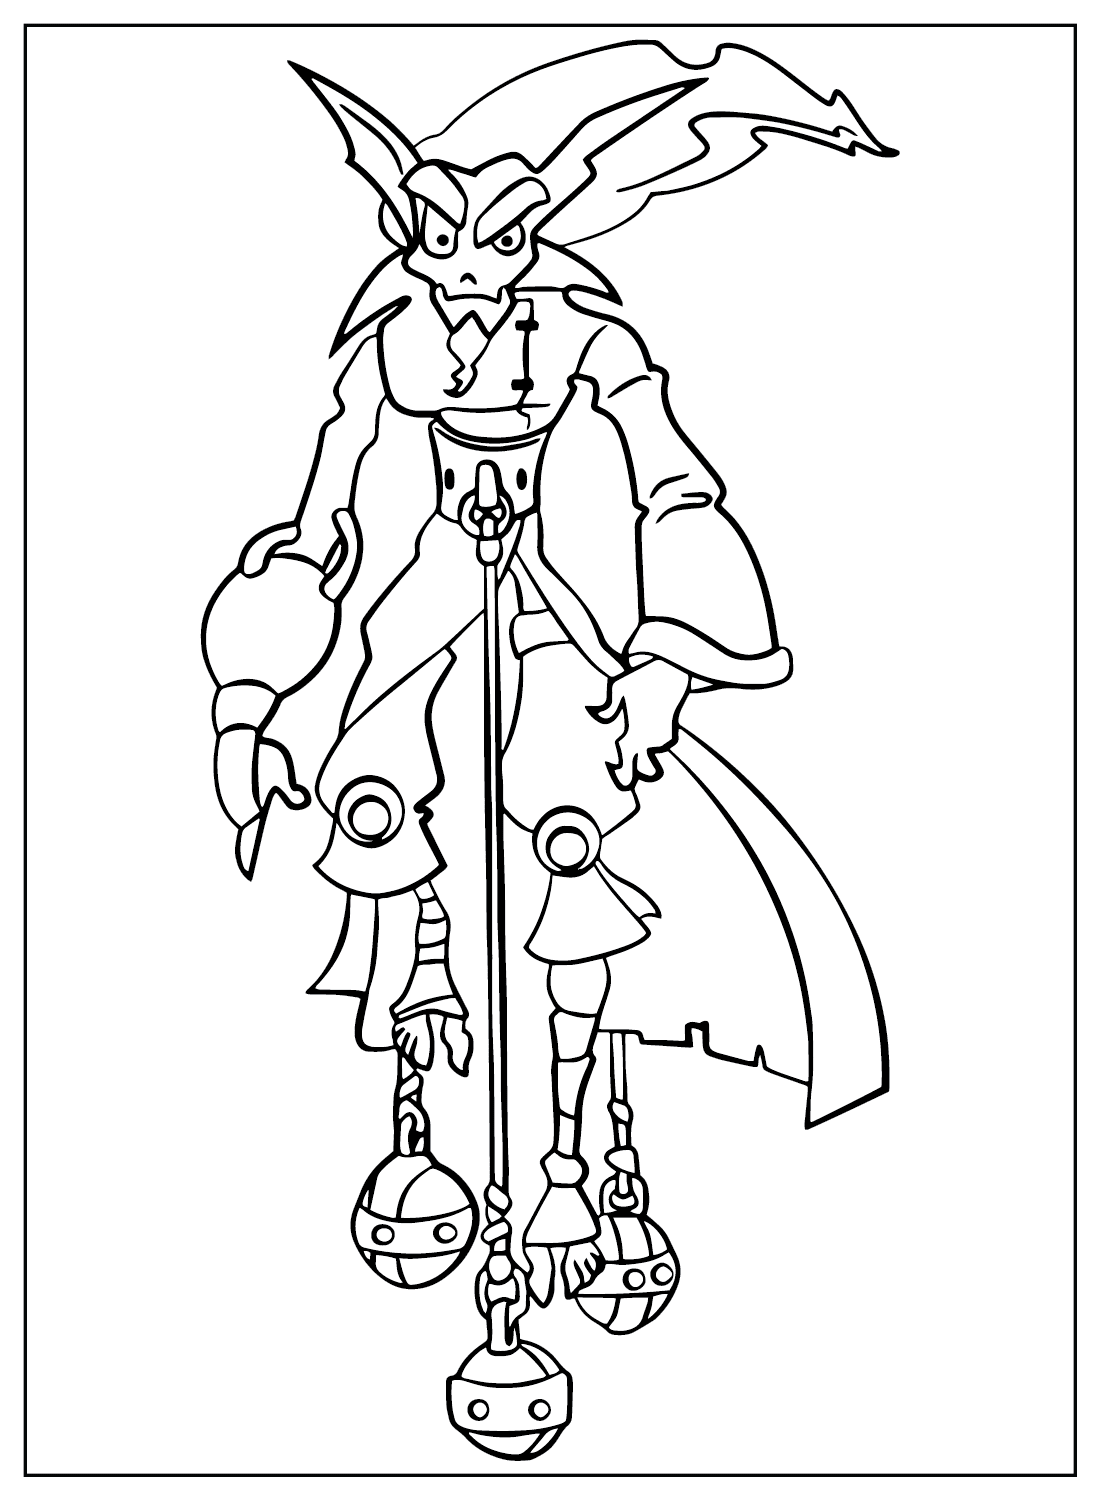 Gol Acheron Coloring Page from Jak and Daxter